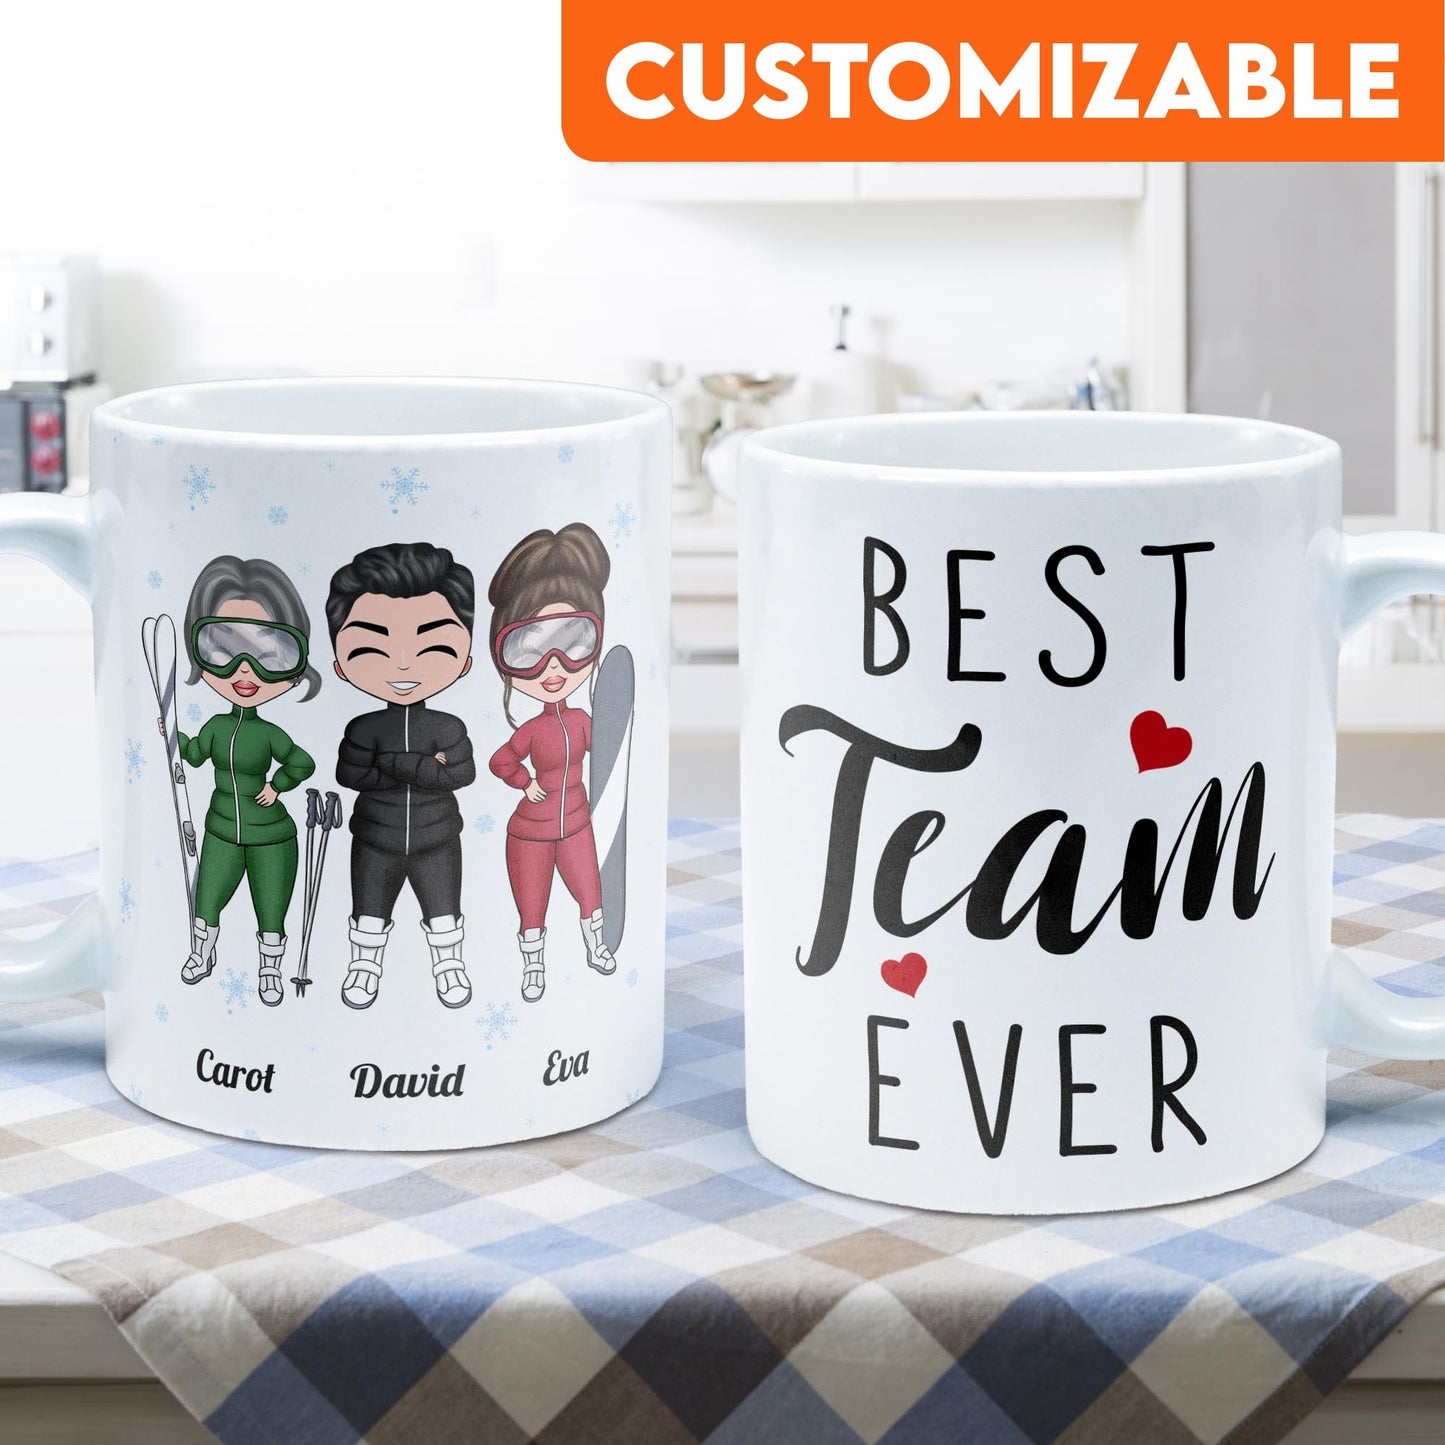 We Are A Team - Personalized Mug - Birthday Gift For Best Friends, Skiing Team, Skiing Lovers